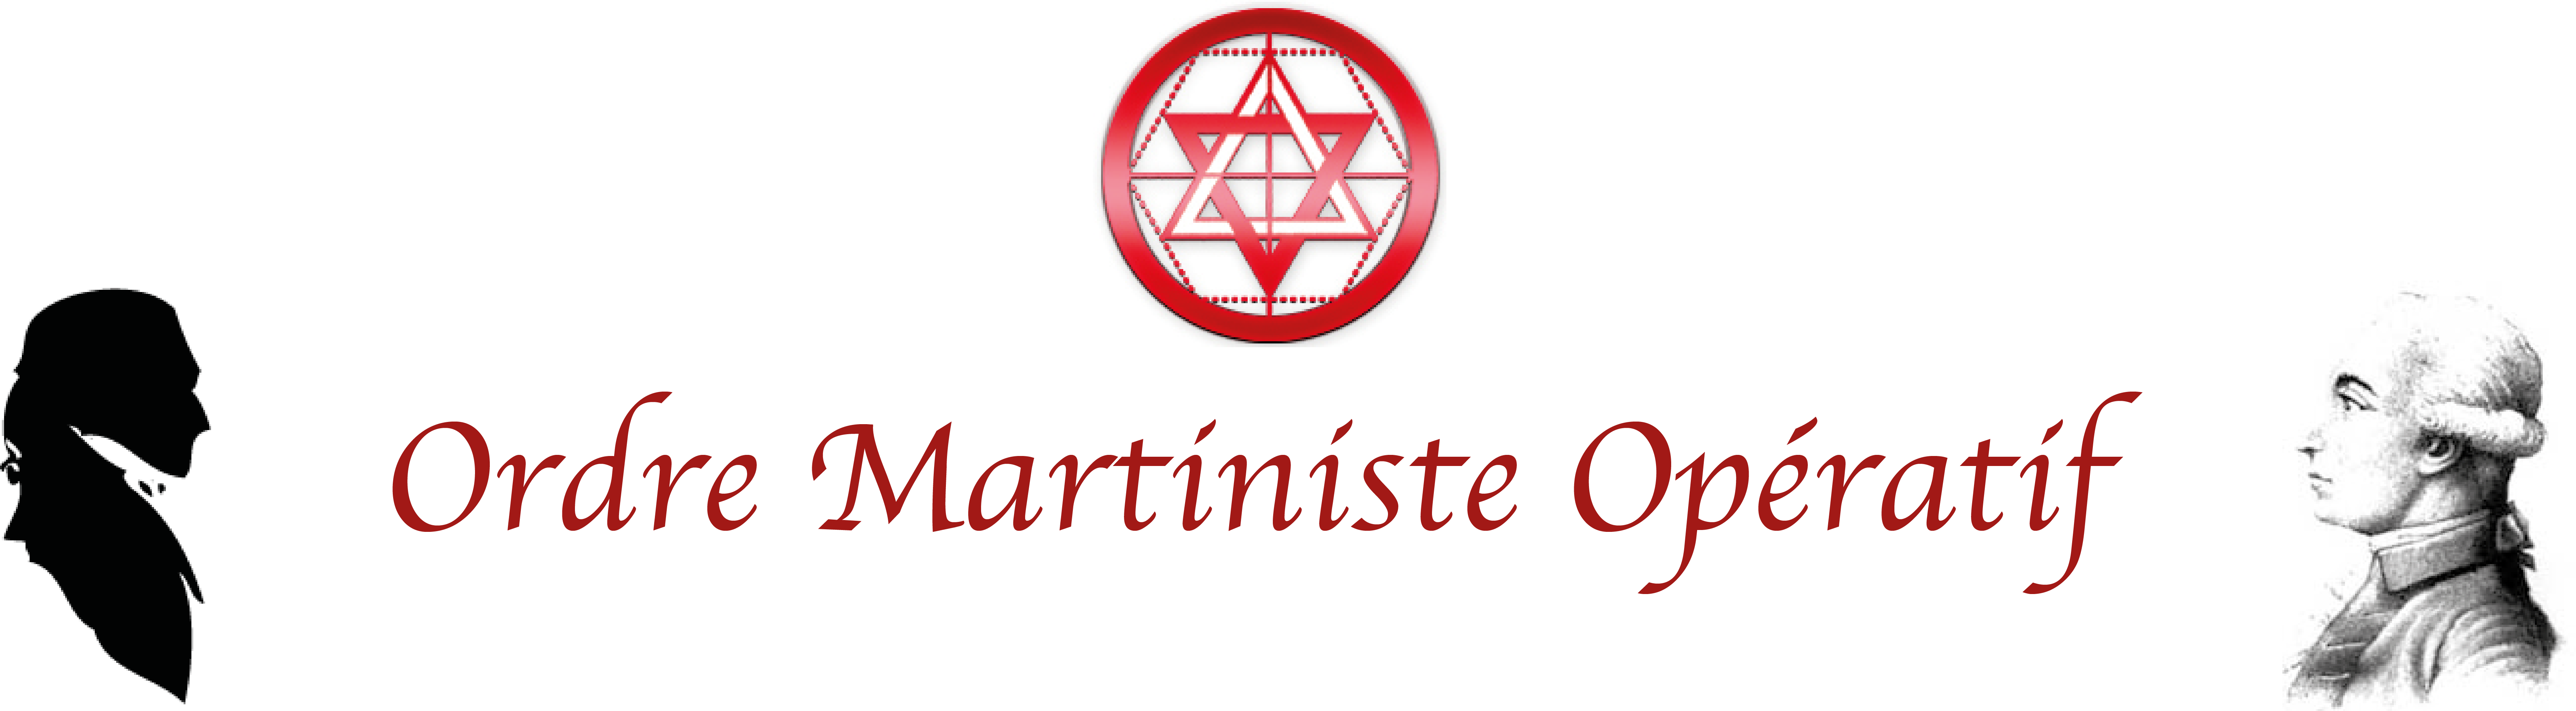 martinism, martinisme, st martin, magic, magie, theurgy, theurgie, ritual, papus, angel, ange, rituel